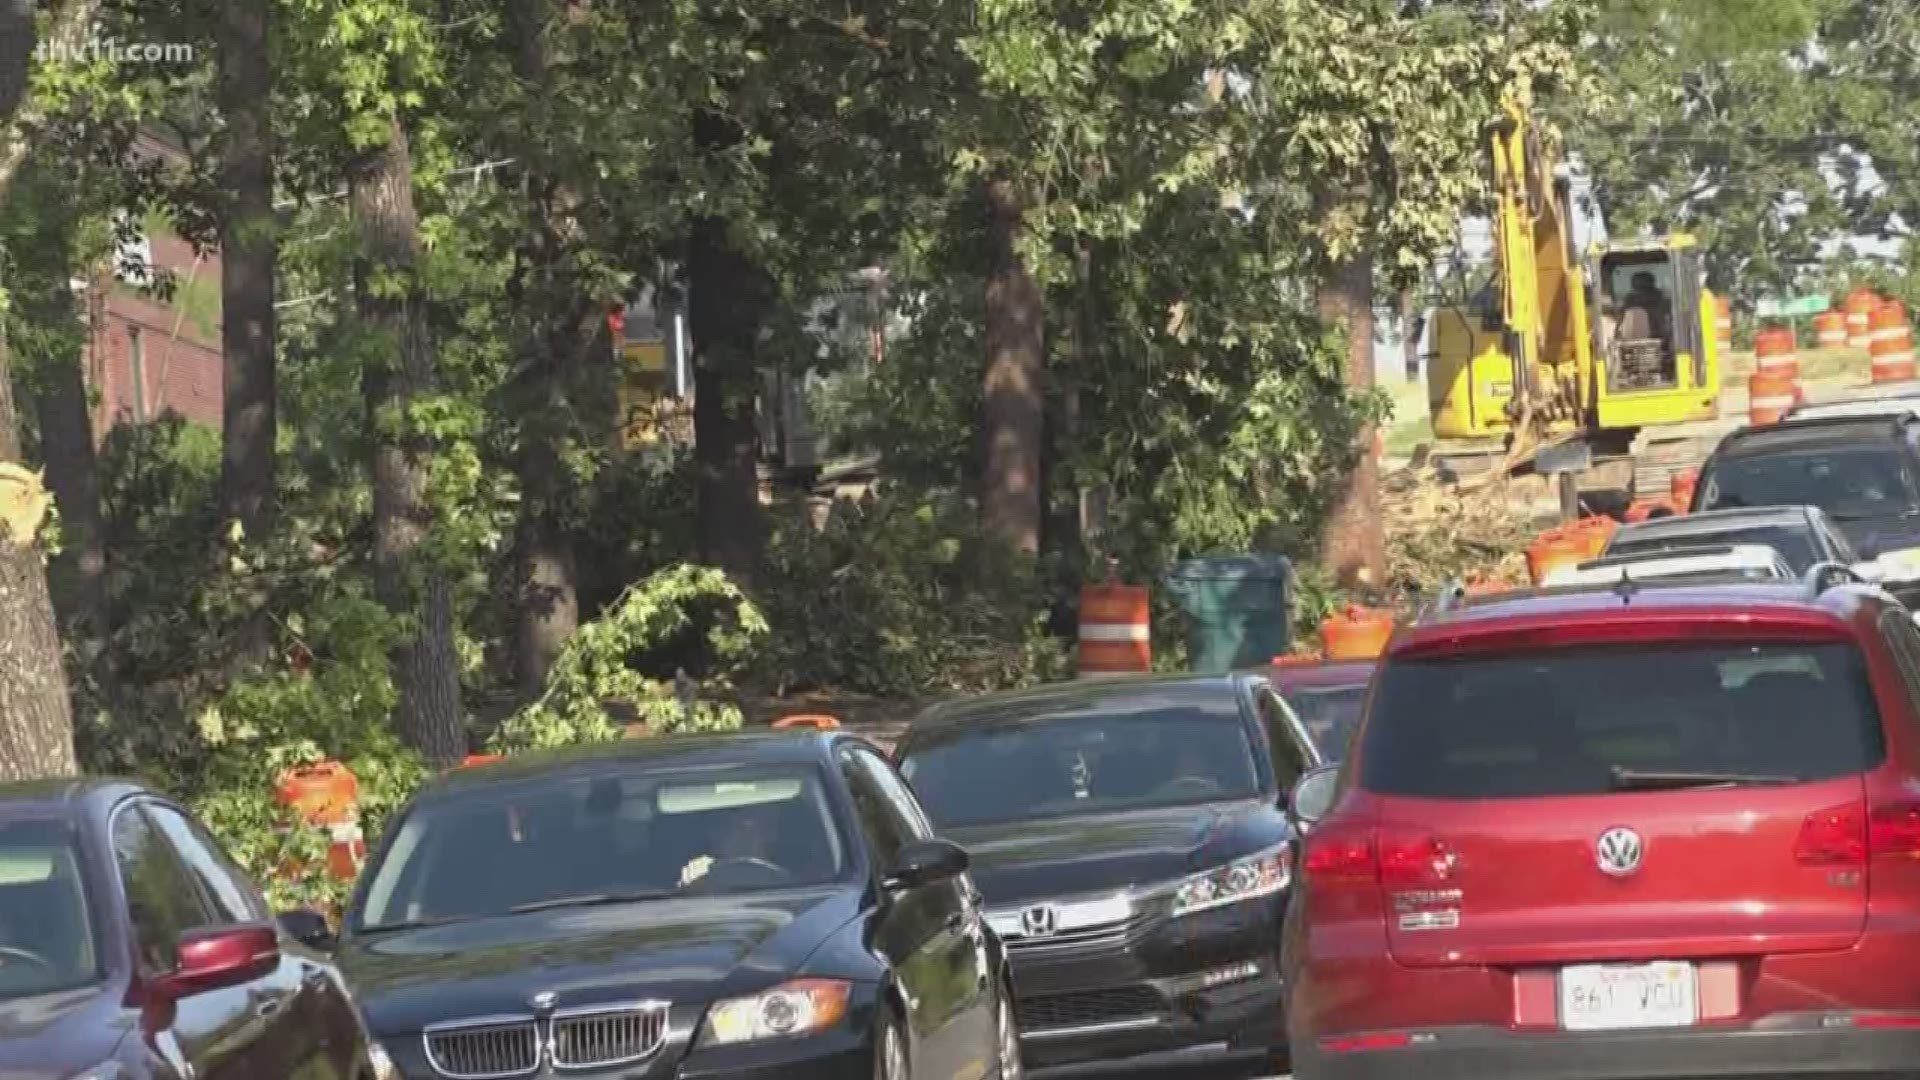 If you drive down Kanis Road in Little Rock, you know how much of a headache the traffic and construction can be, but drivers should expect changes coming next week.